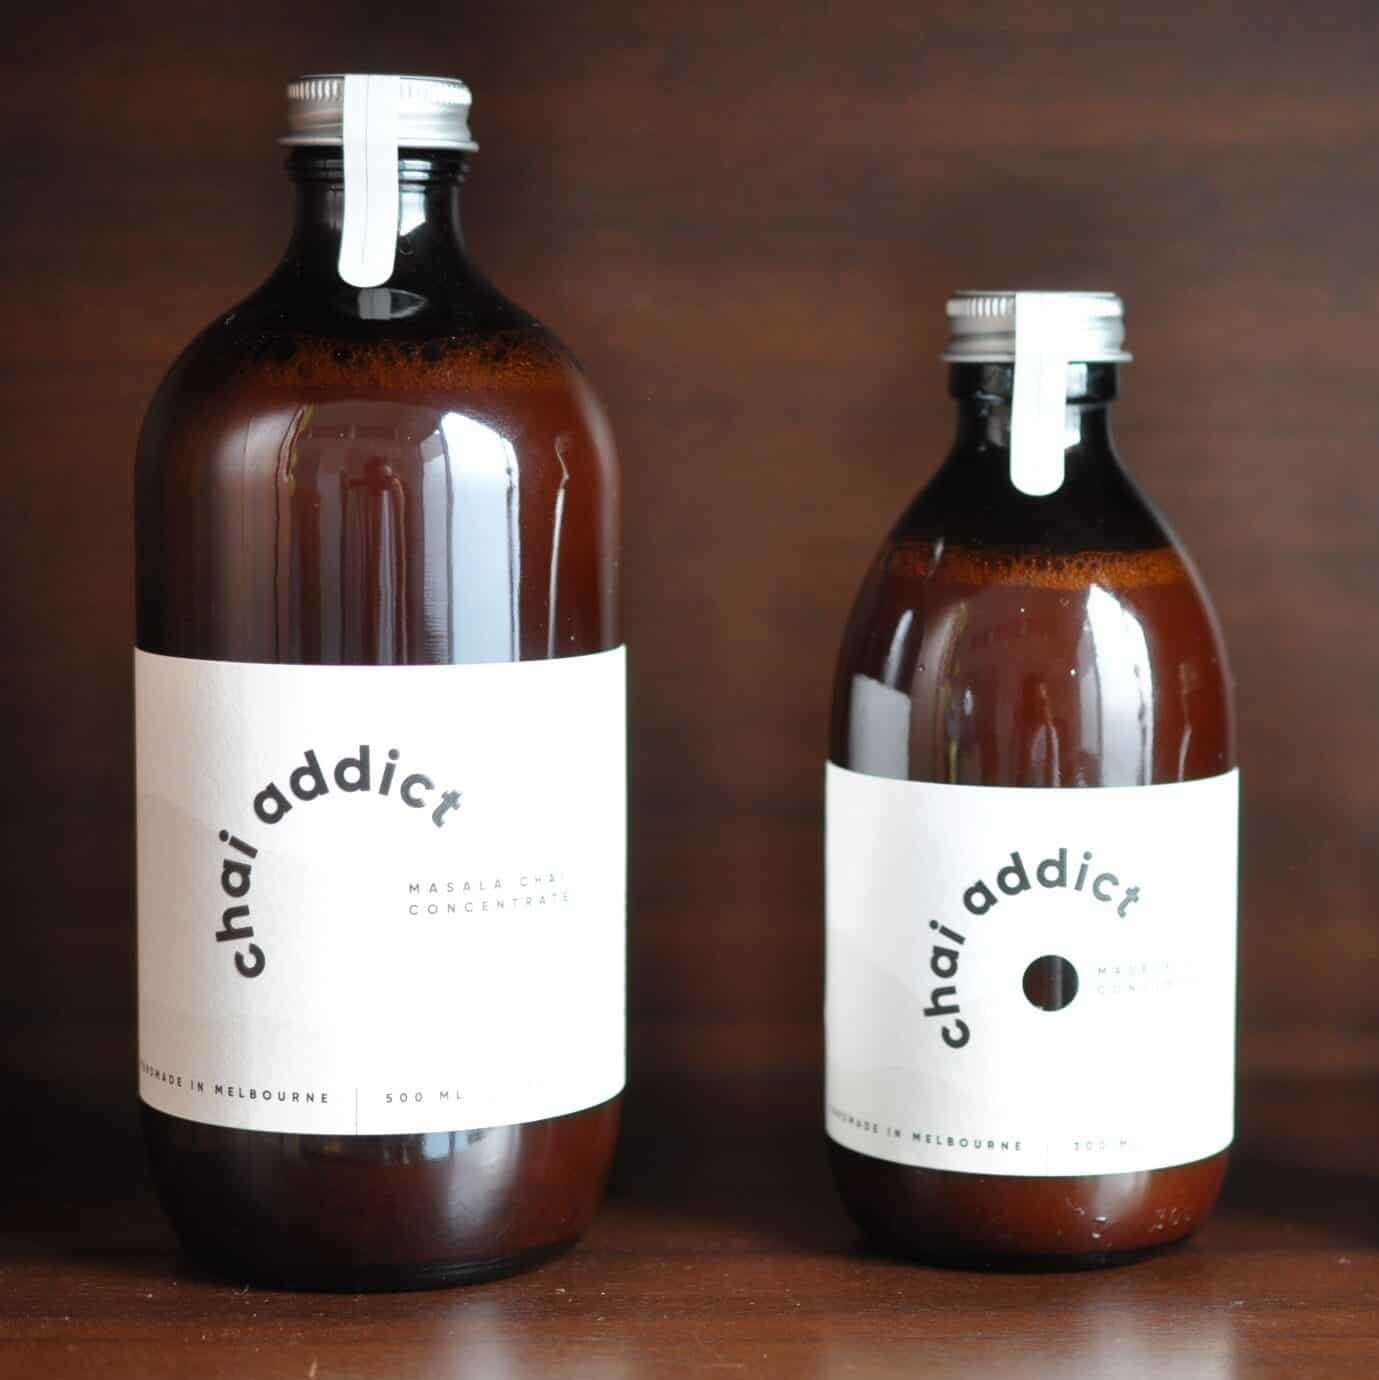 300ml and 500ml bottles of chai addict masala chai concentrates against a brown mid-centrury buffet